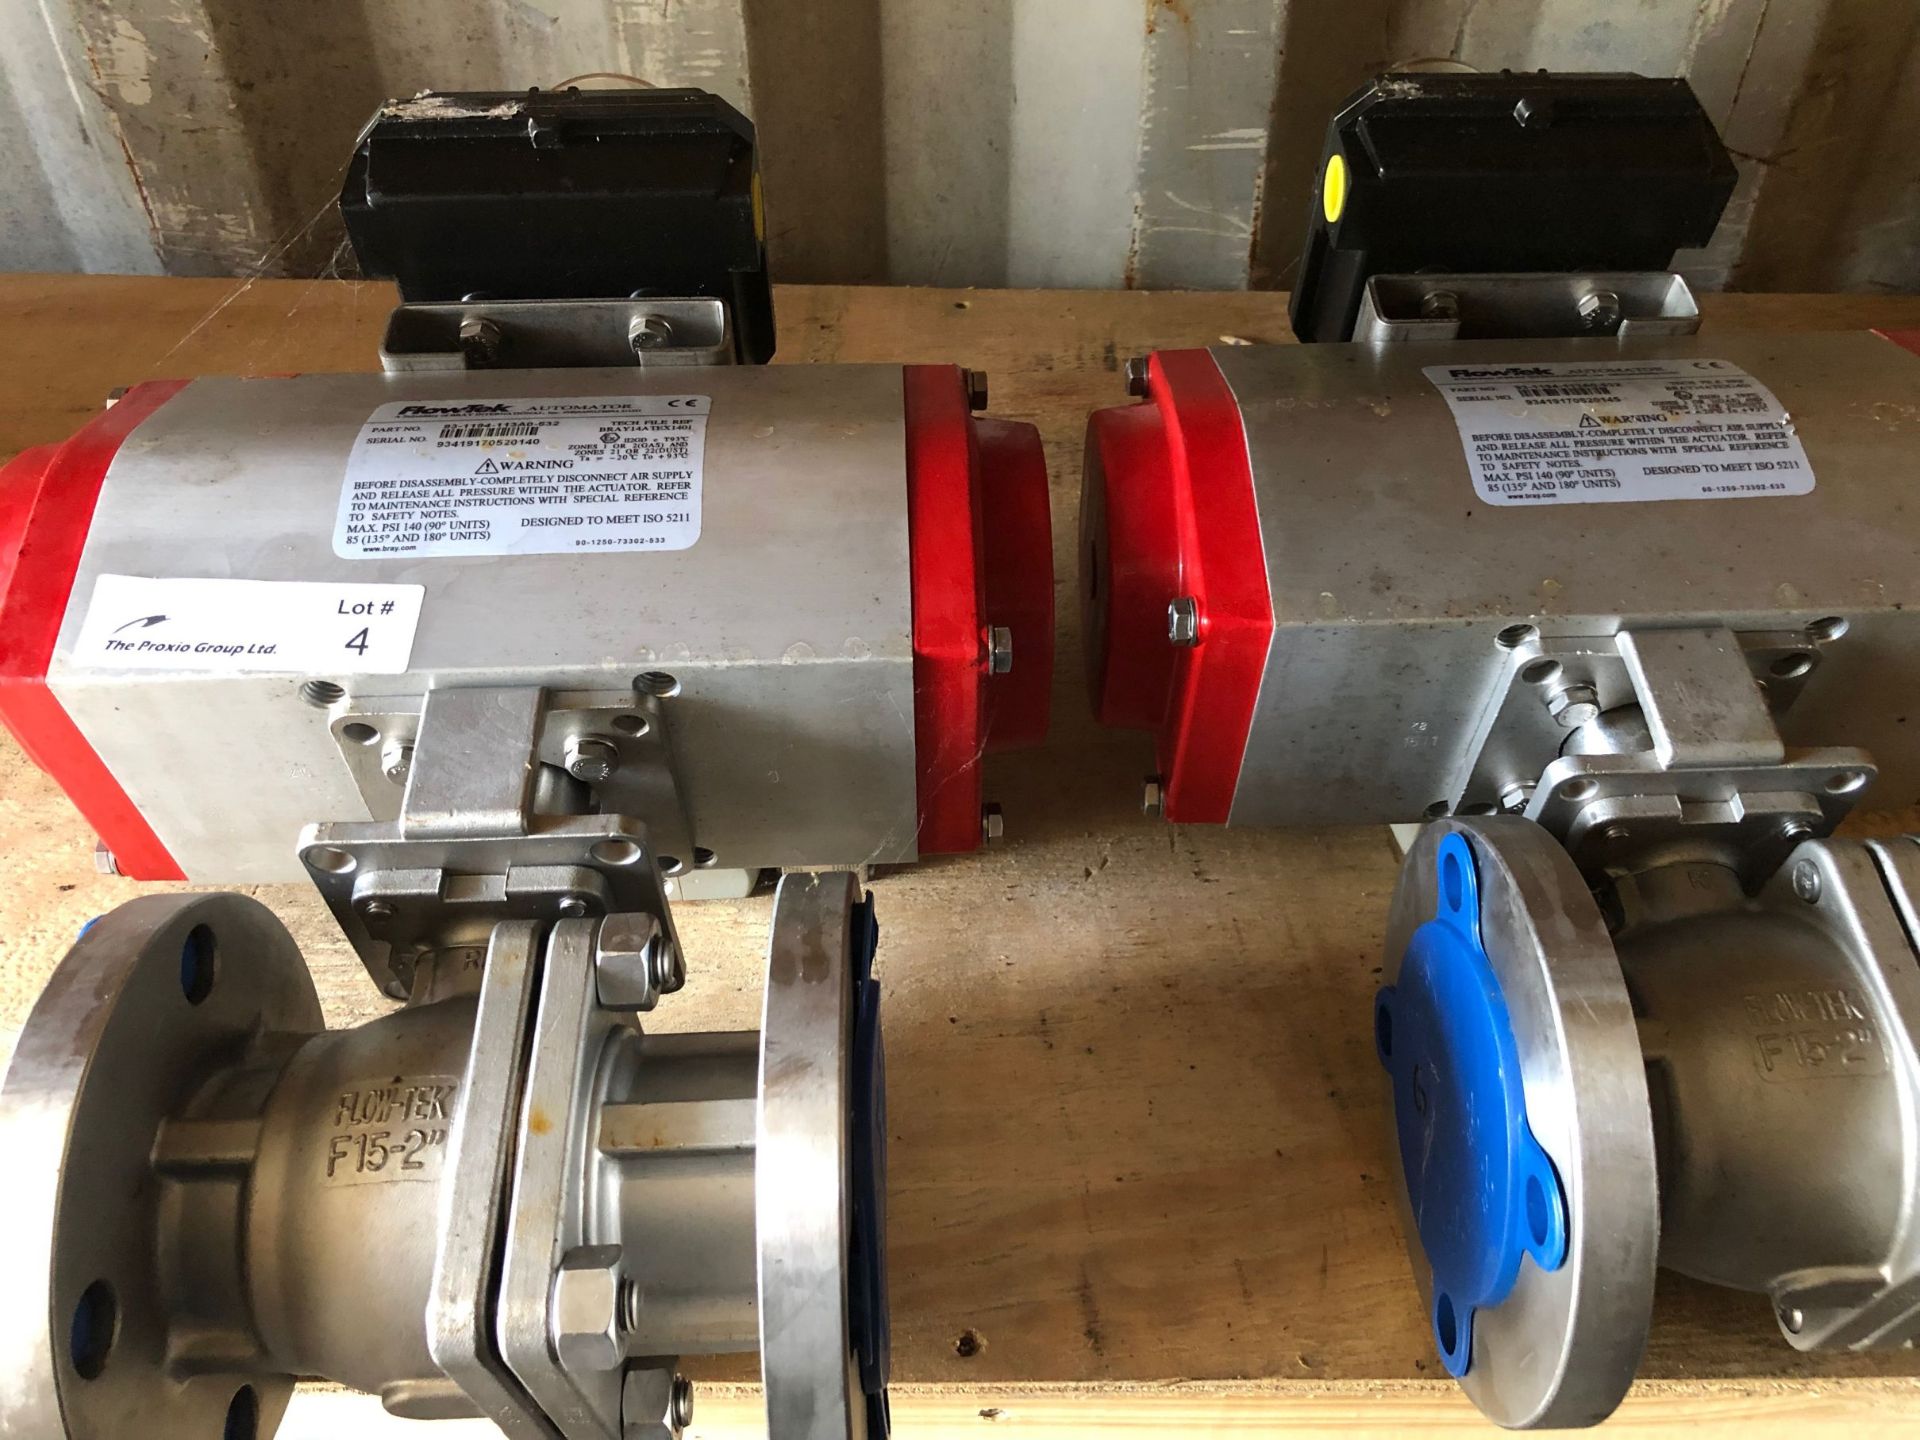 (2) Flow-Tech Model 93-1194-113A0-523 2" Electrically Actuated Valves